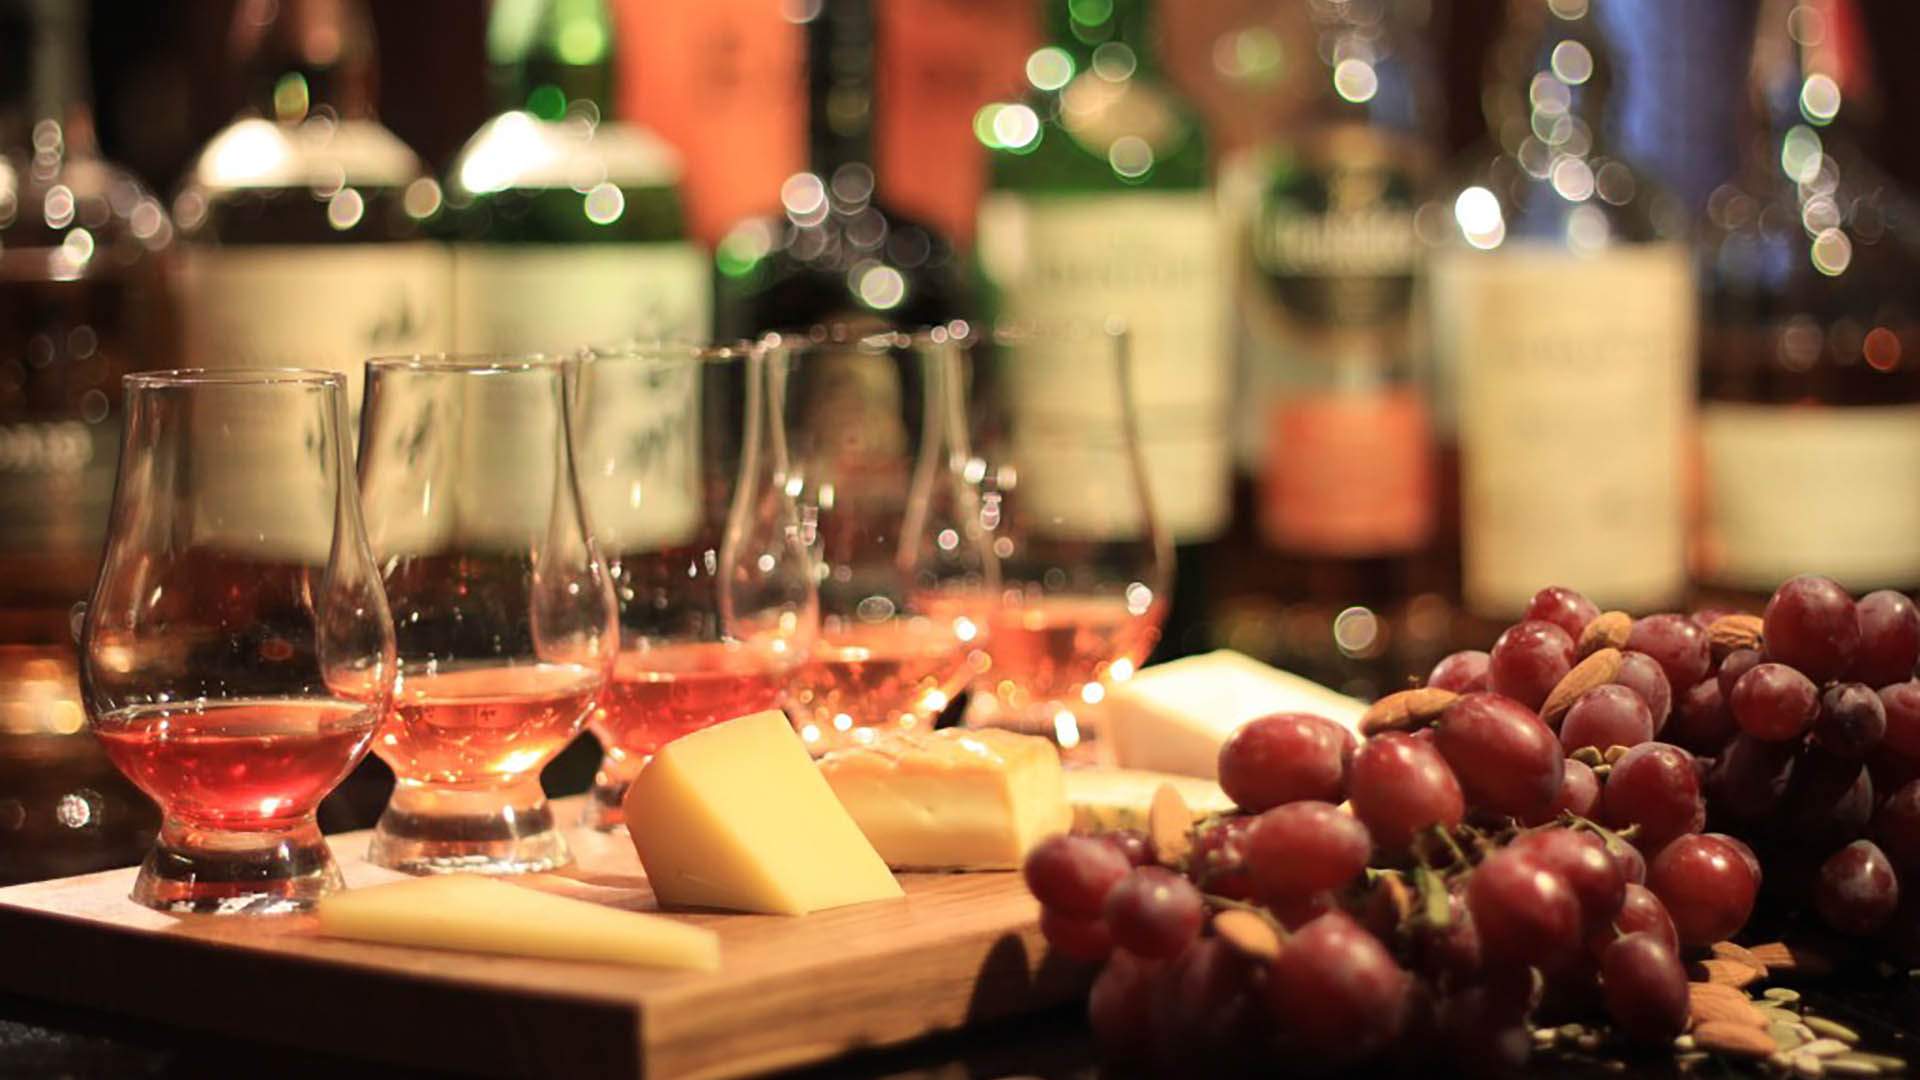 Tuesday Whisky & Cheese Night